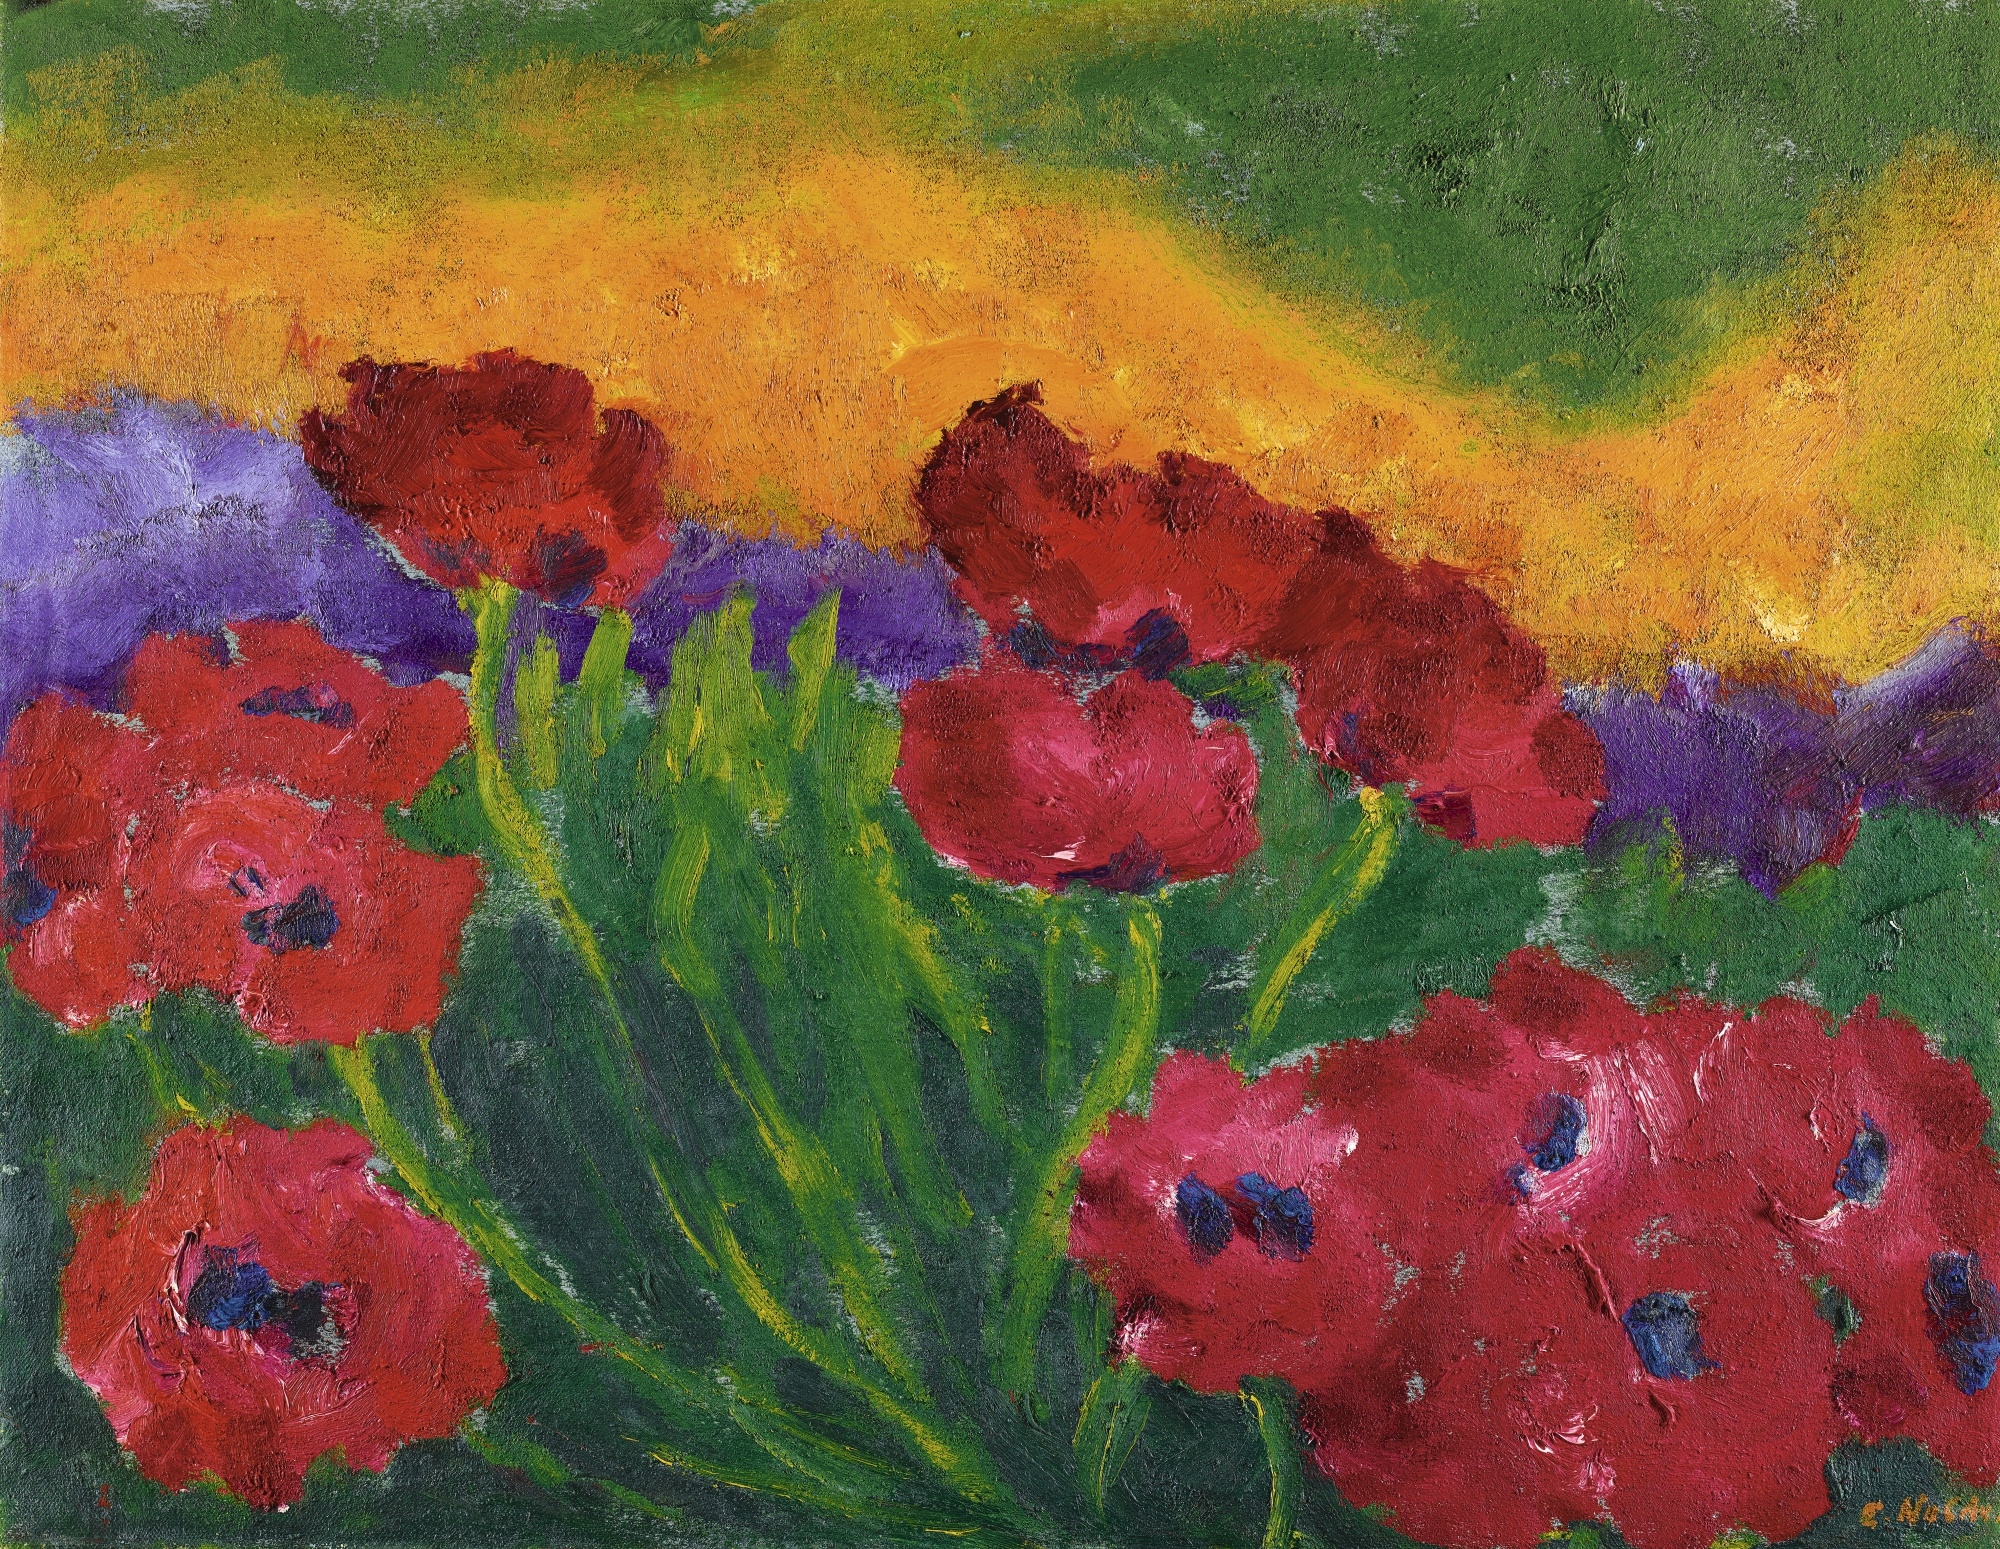 MOHN (POPPIES) by Emil Nolde, 1950